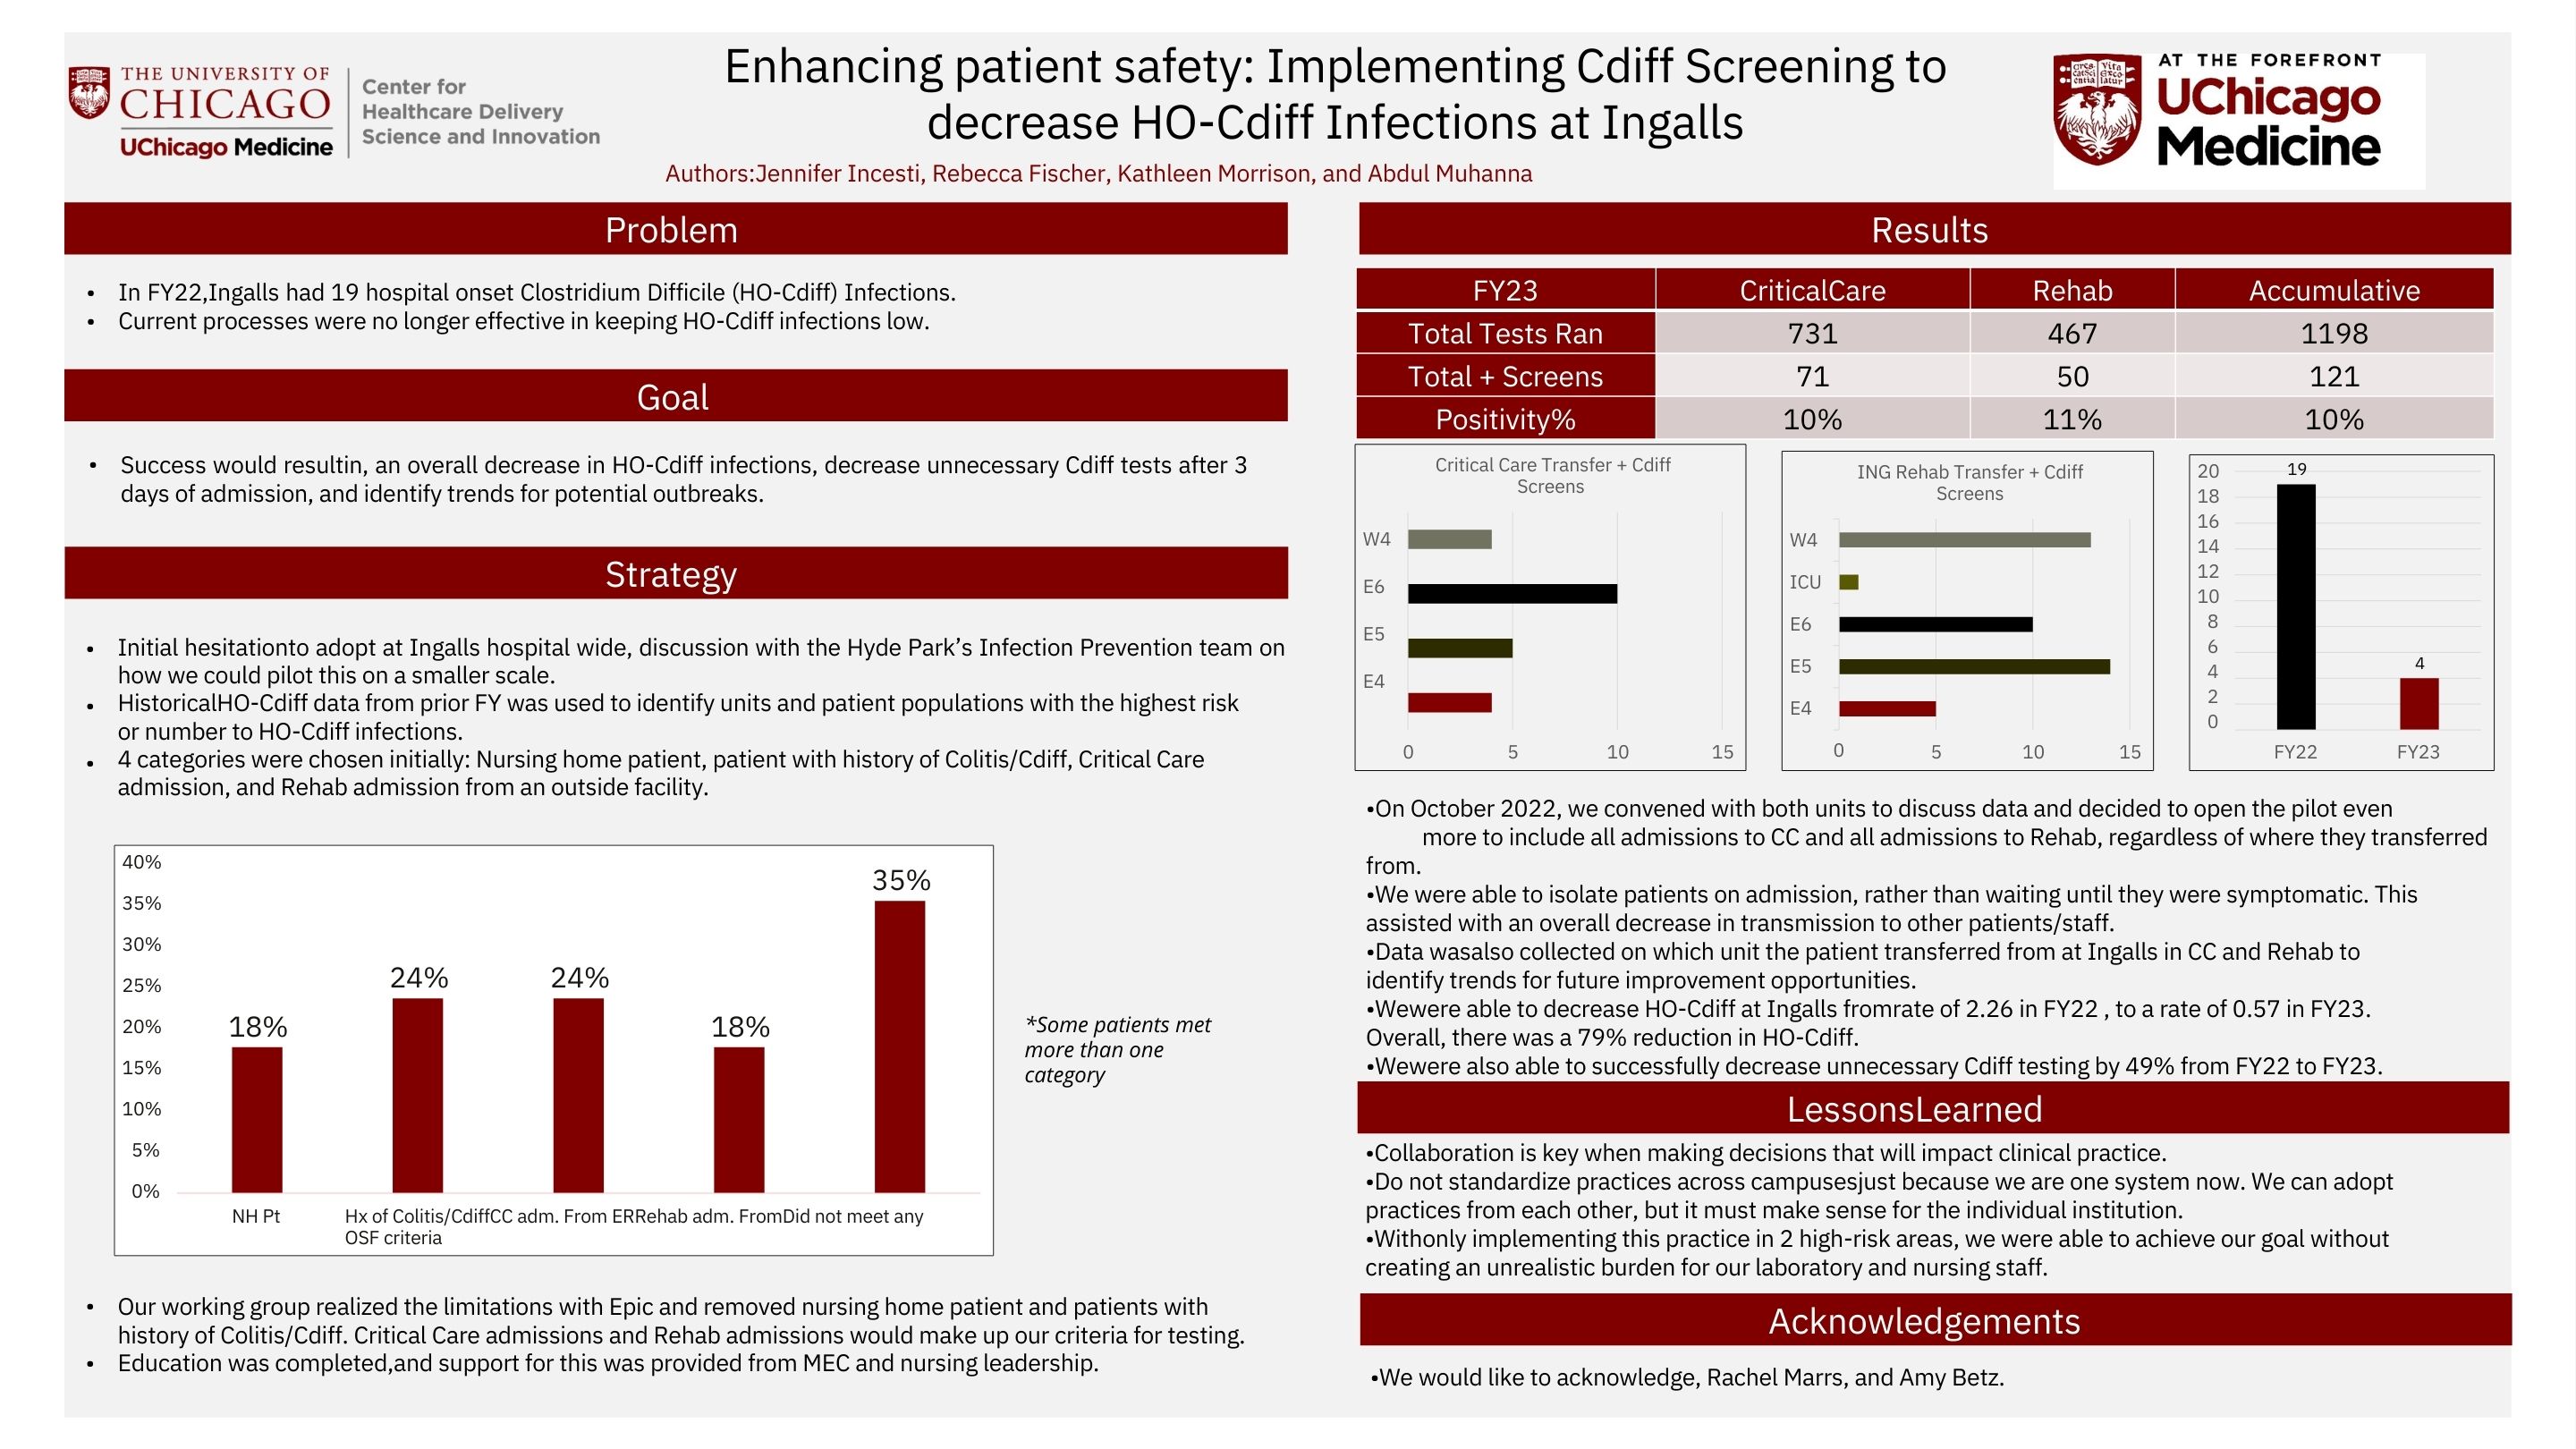 INCESTI_Enhancing Patient Safety Implementing Cdiff Screening to decrease HO Cdiff Infections at Ingalls